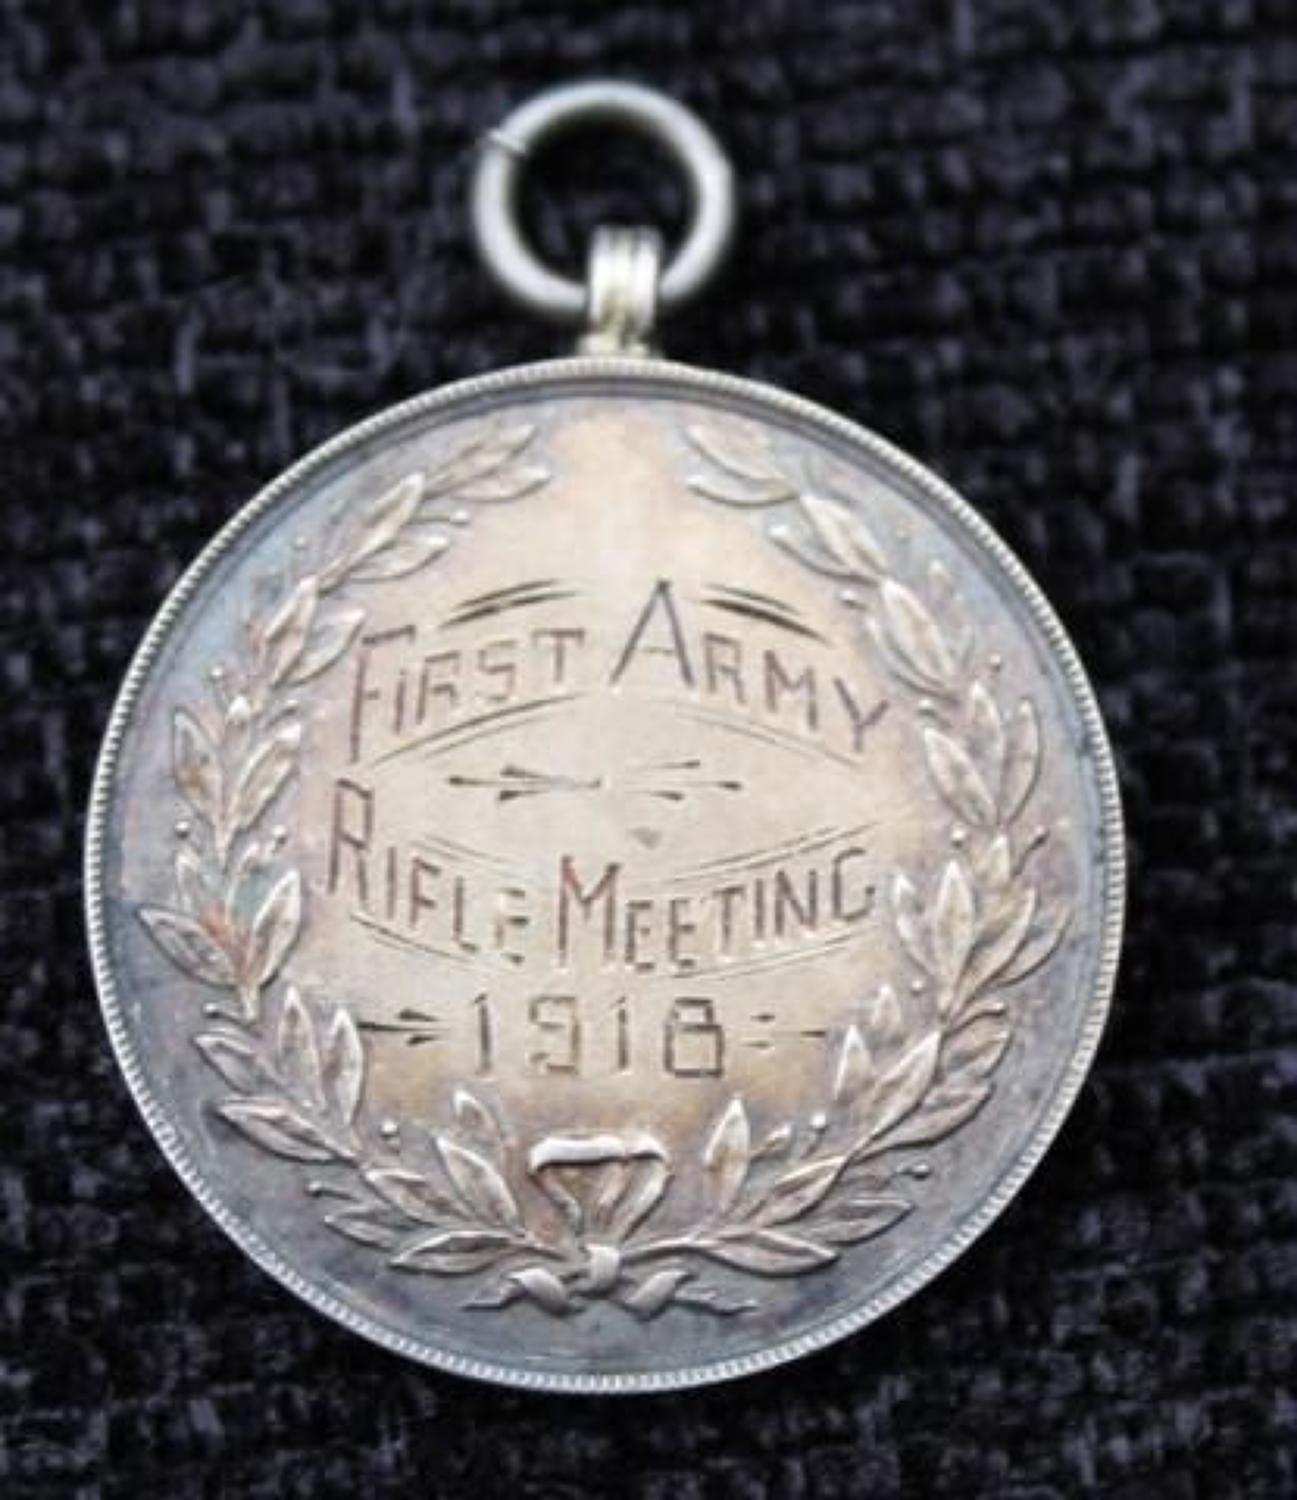 First Army Rifle Meeting 1918 Silver Medal